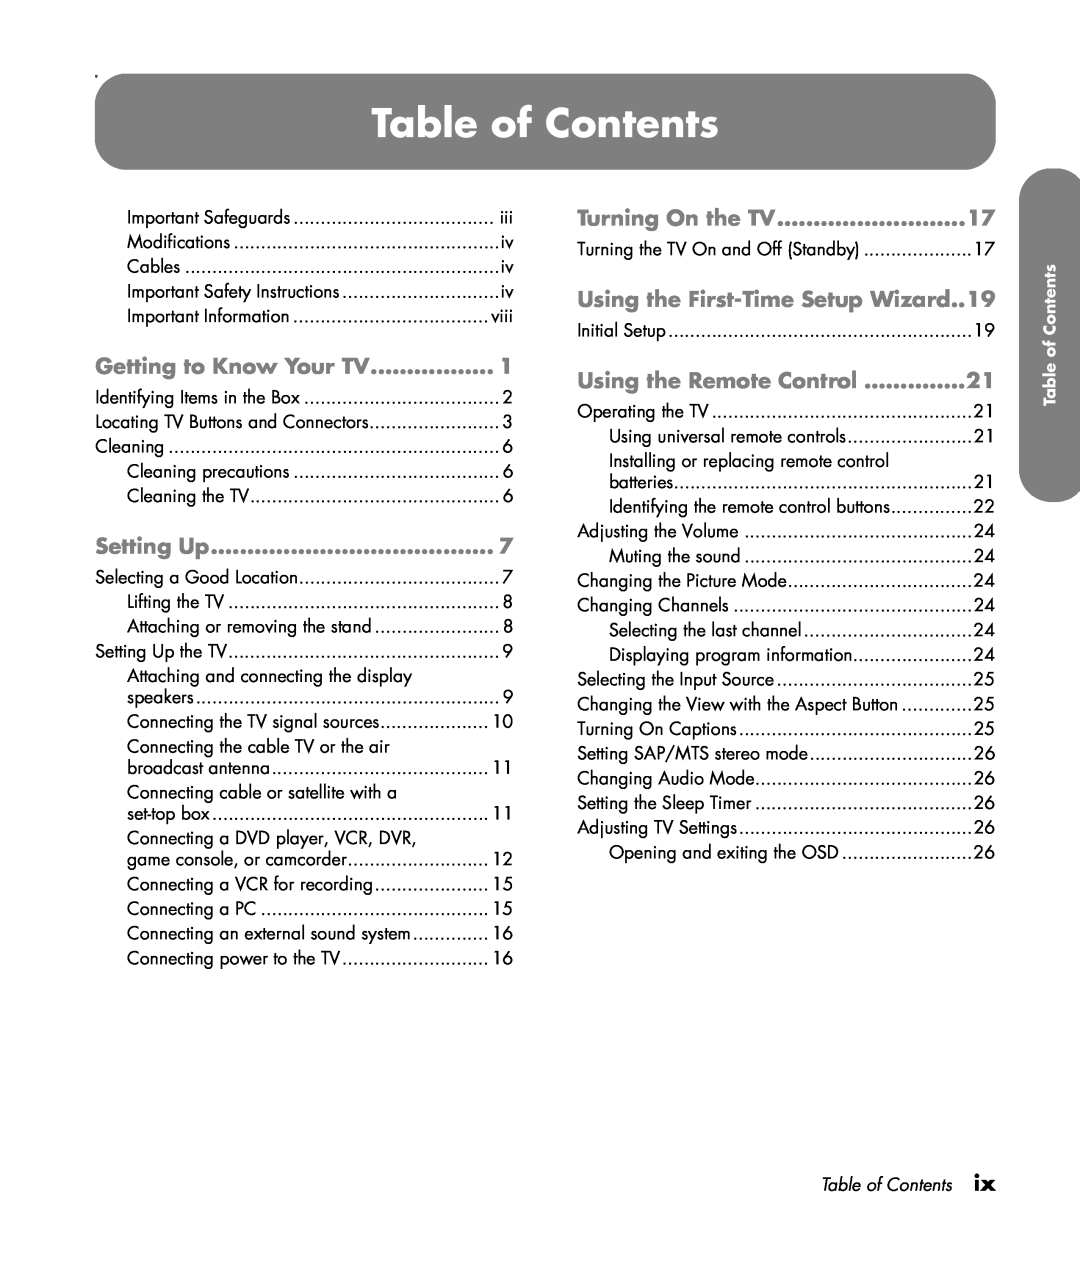 HP PL4260N 42 inch Plasma manual Table of Contents, Turning On the TV, Using the First-Time Setup Wizard..19, Setting Up 